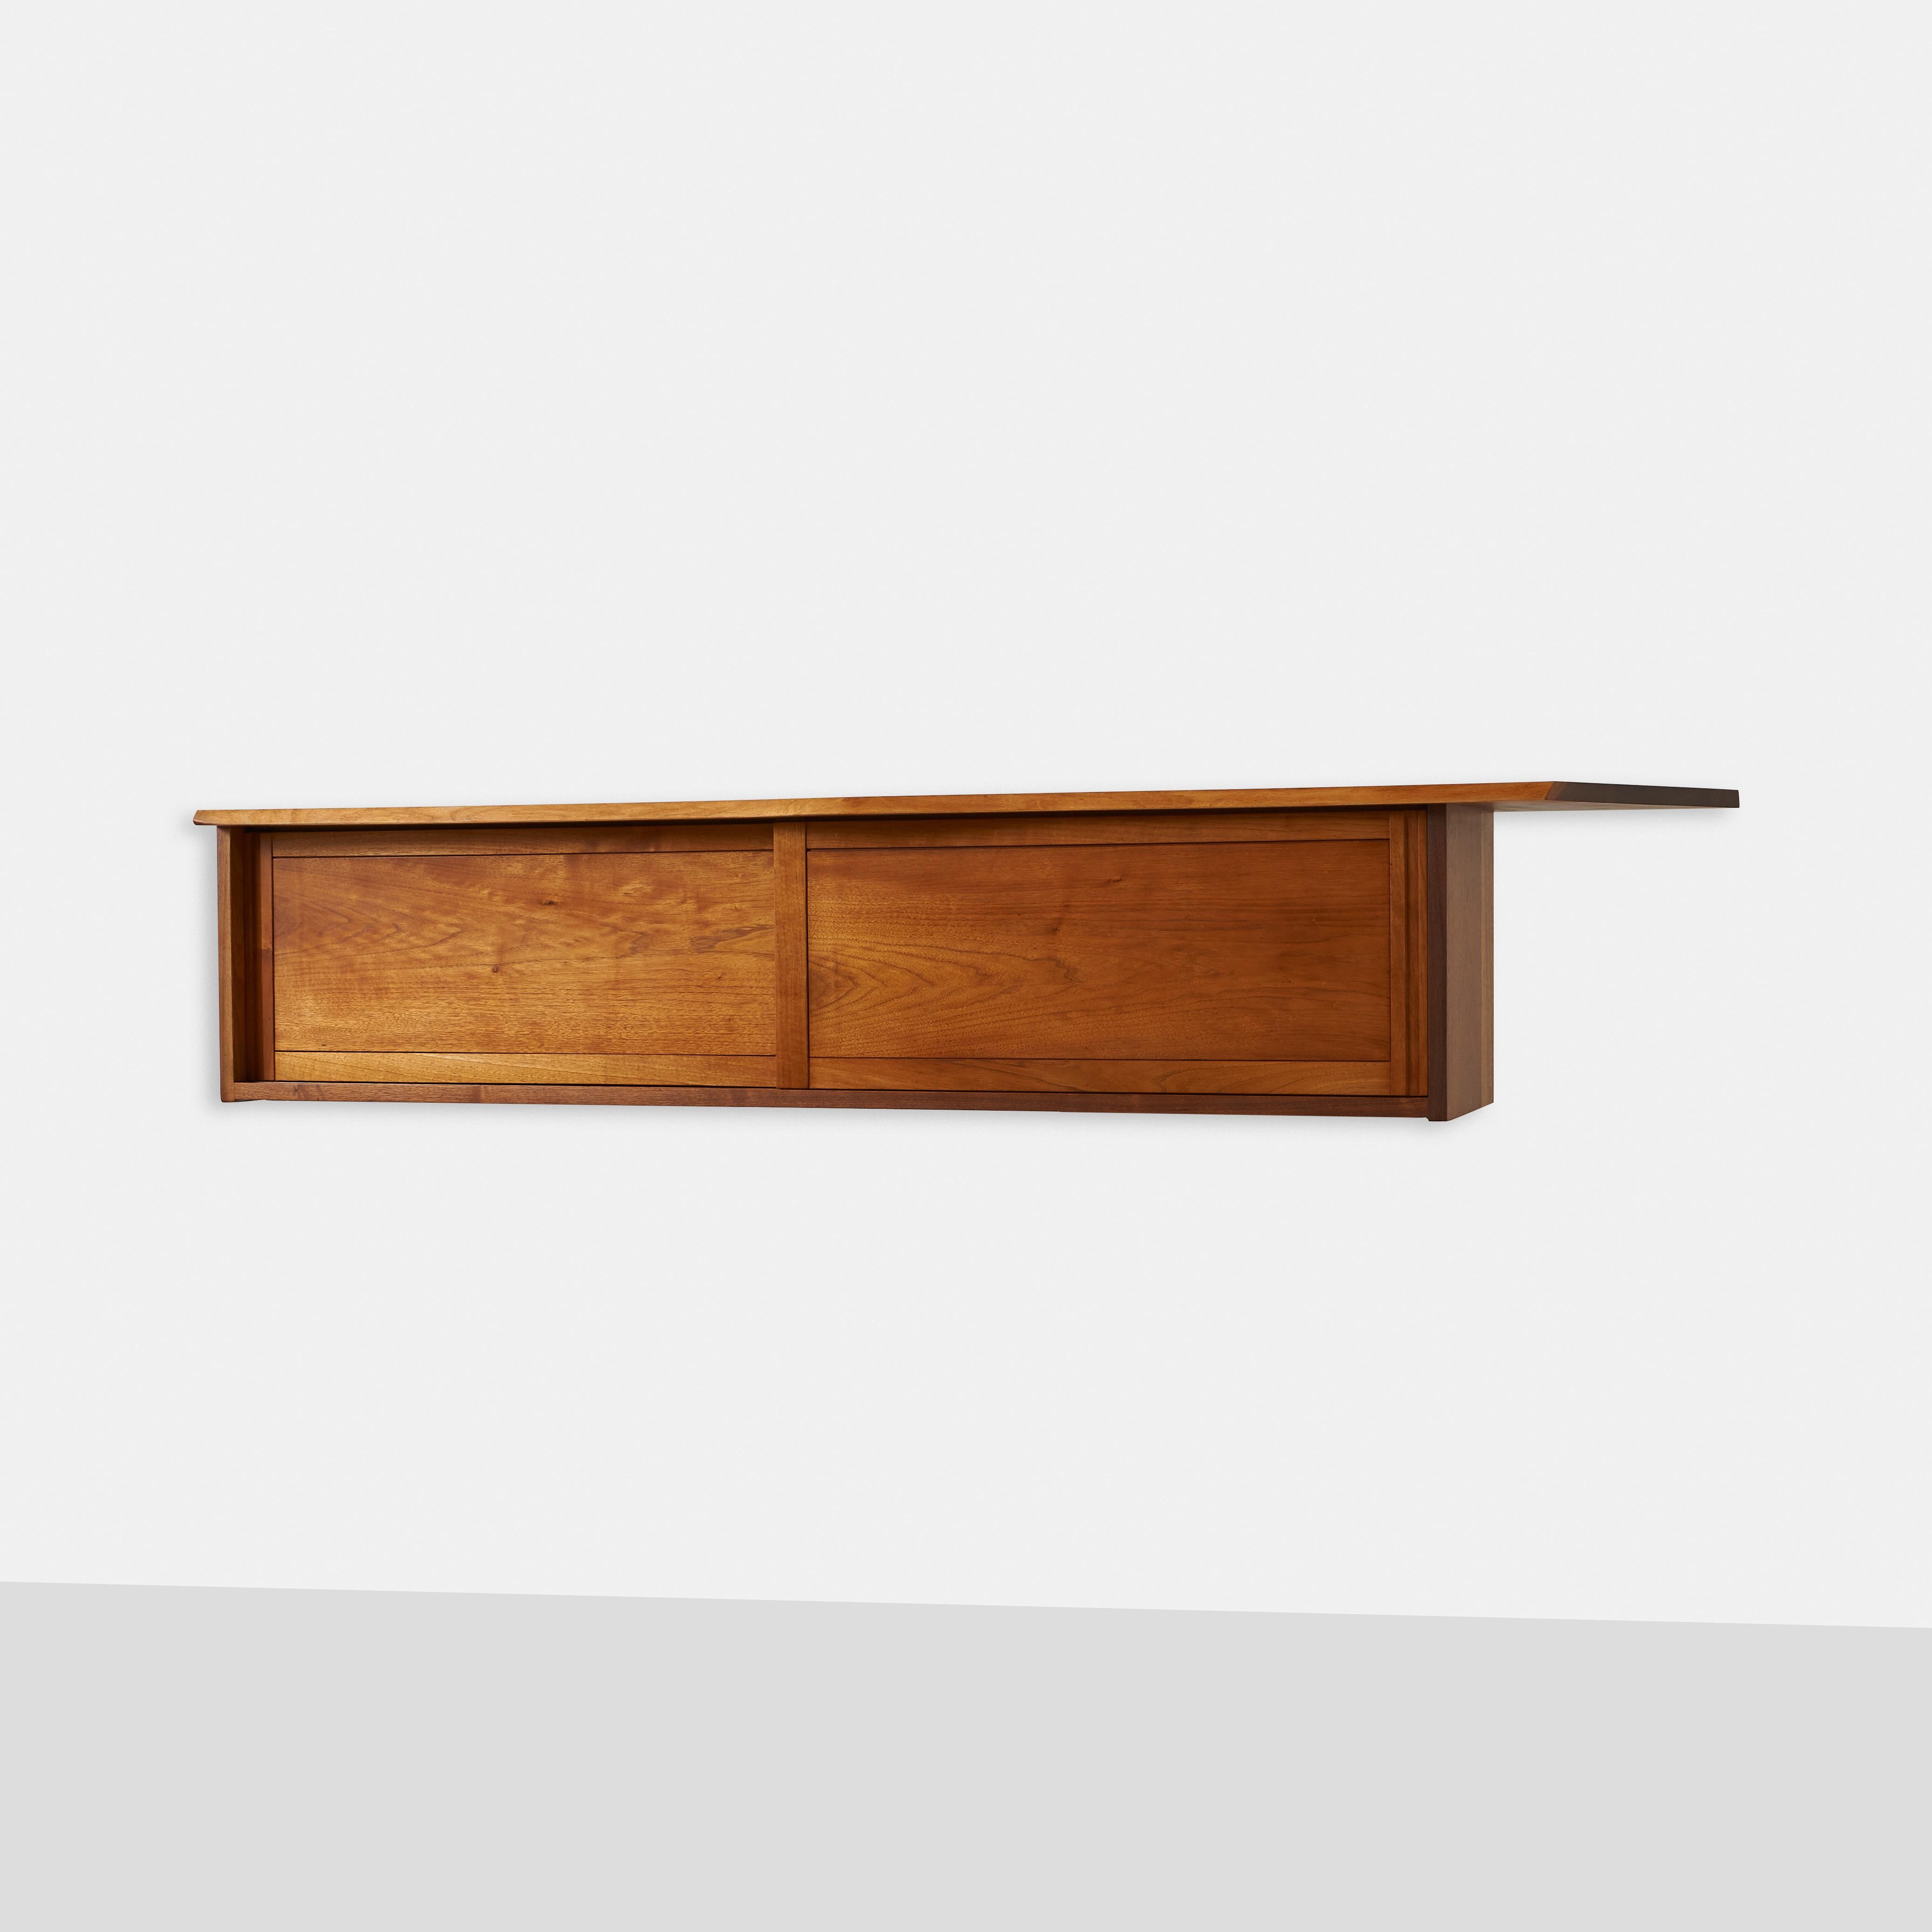 This rare and unique walnut hanging cabinet by George Nakashima is a beautiful and functional piece of modern furniture with sliding doors. The cabinet features an overhang top with one free edge above two doors that conceal one adjustable shelf.